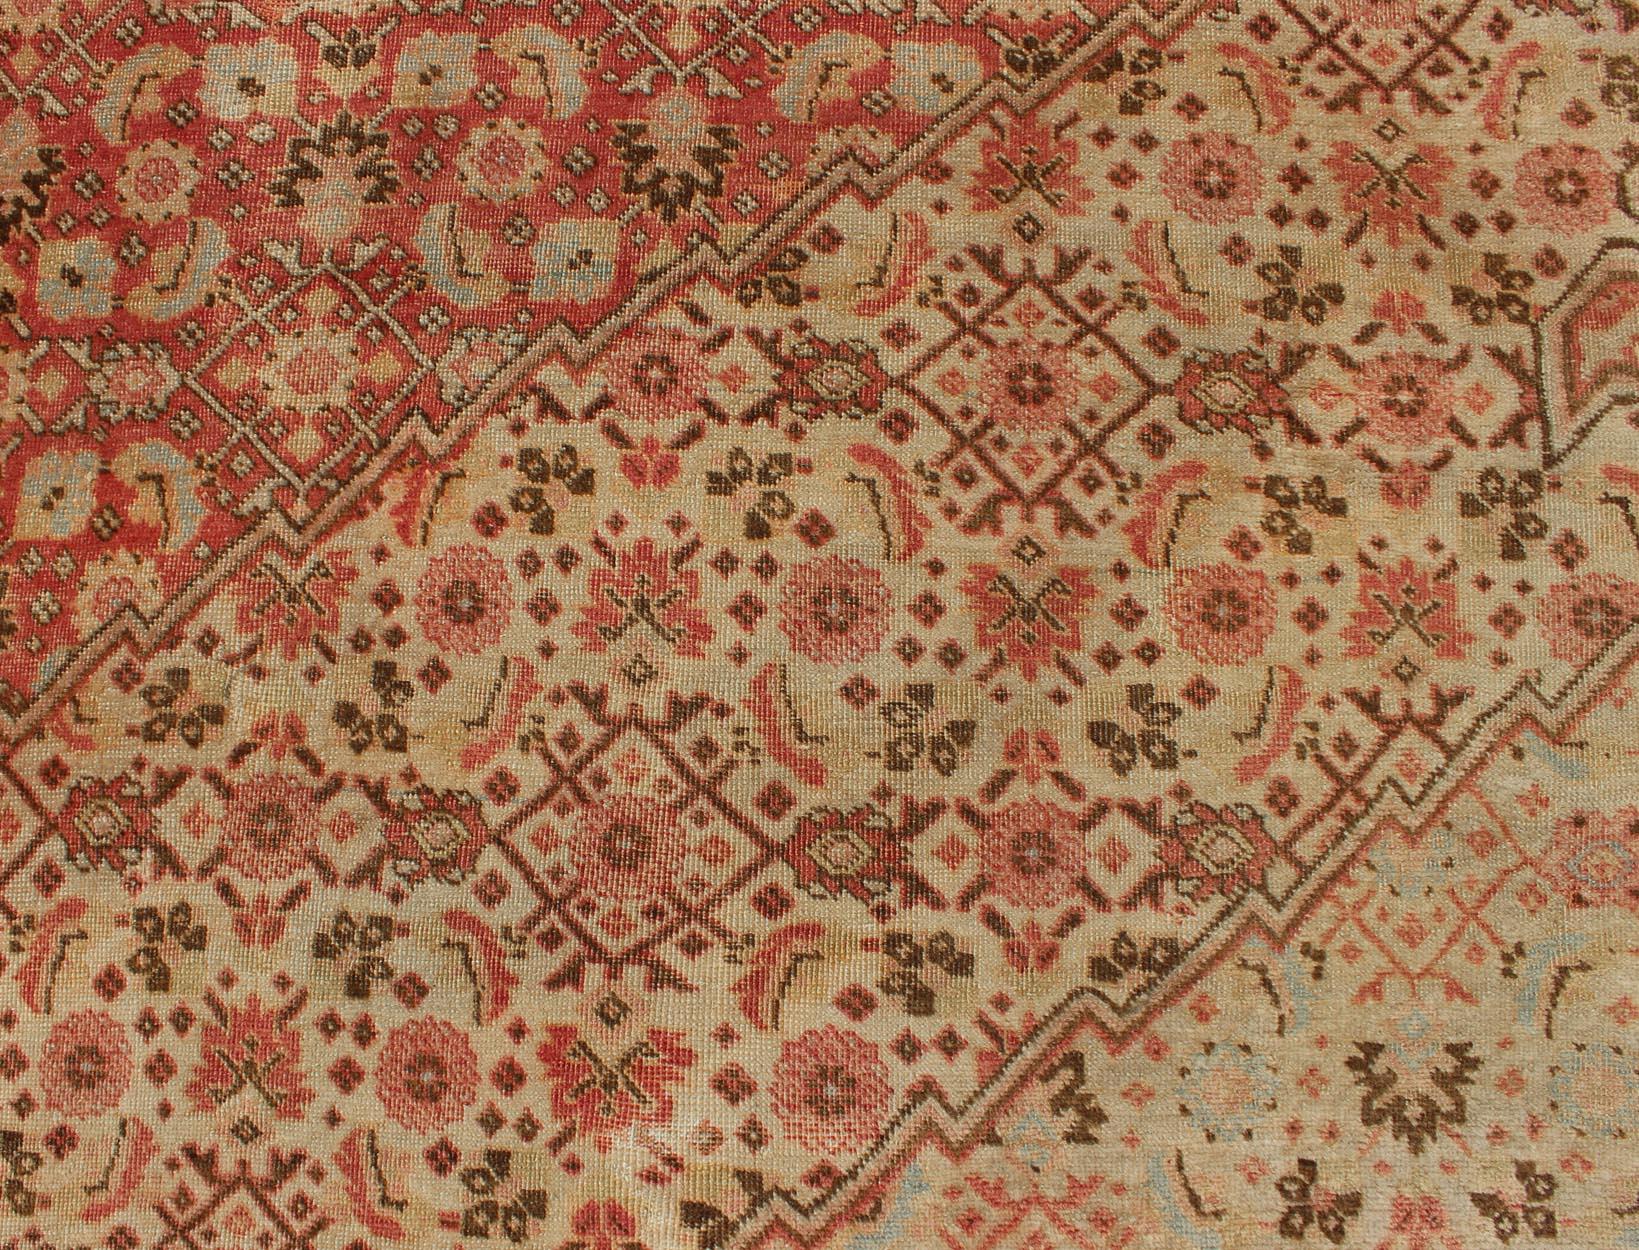 20th Century Antique Persian Tabriz Rug with Medallion Design in Coral, Cream and Brown Tones For Sale